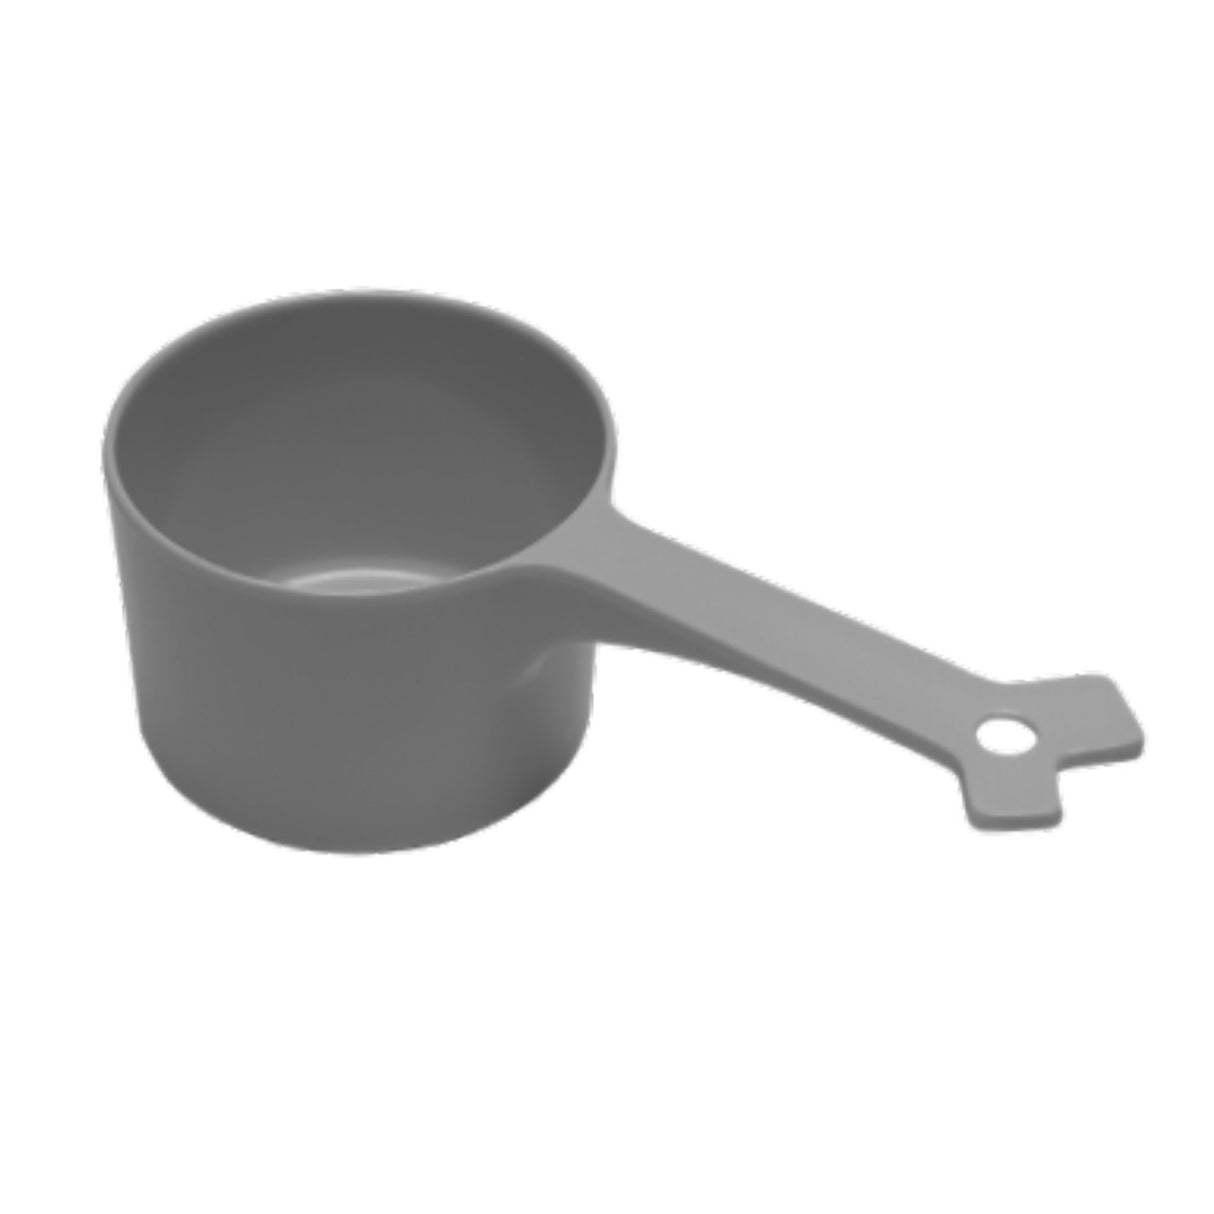 Messy Mutts Dog Food Scoop